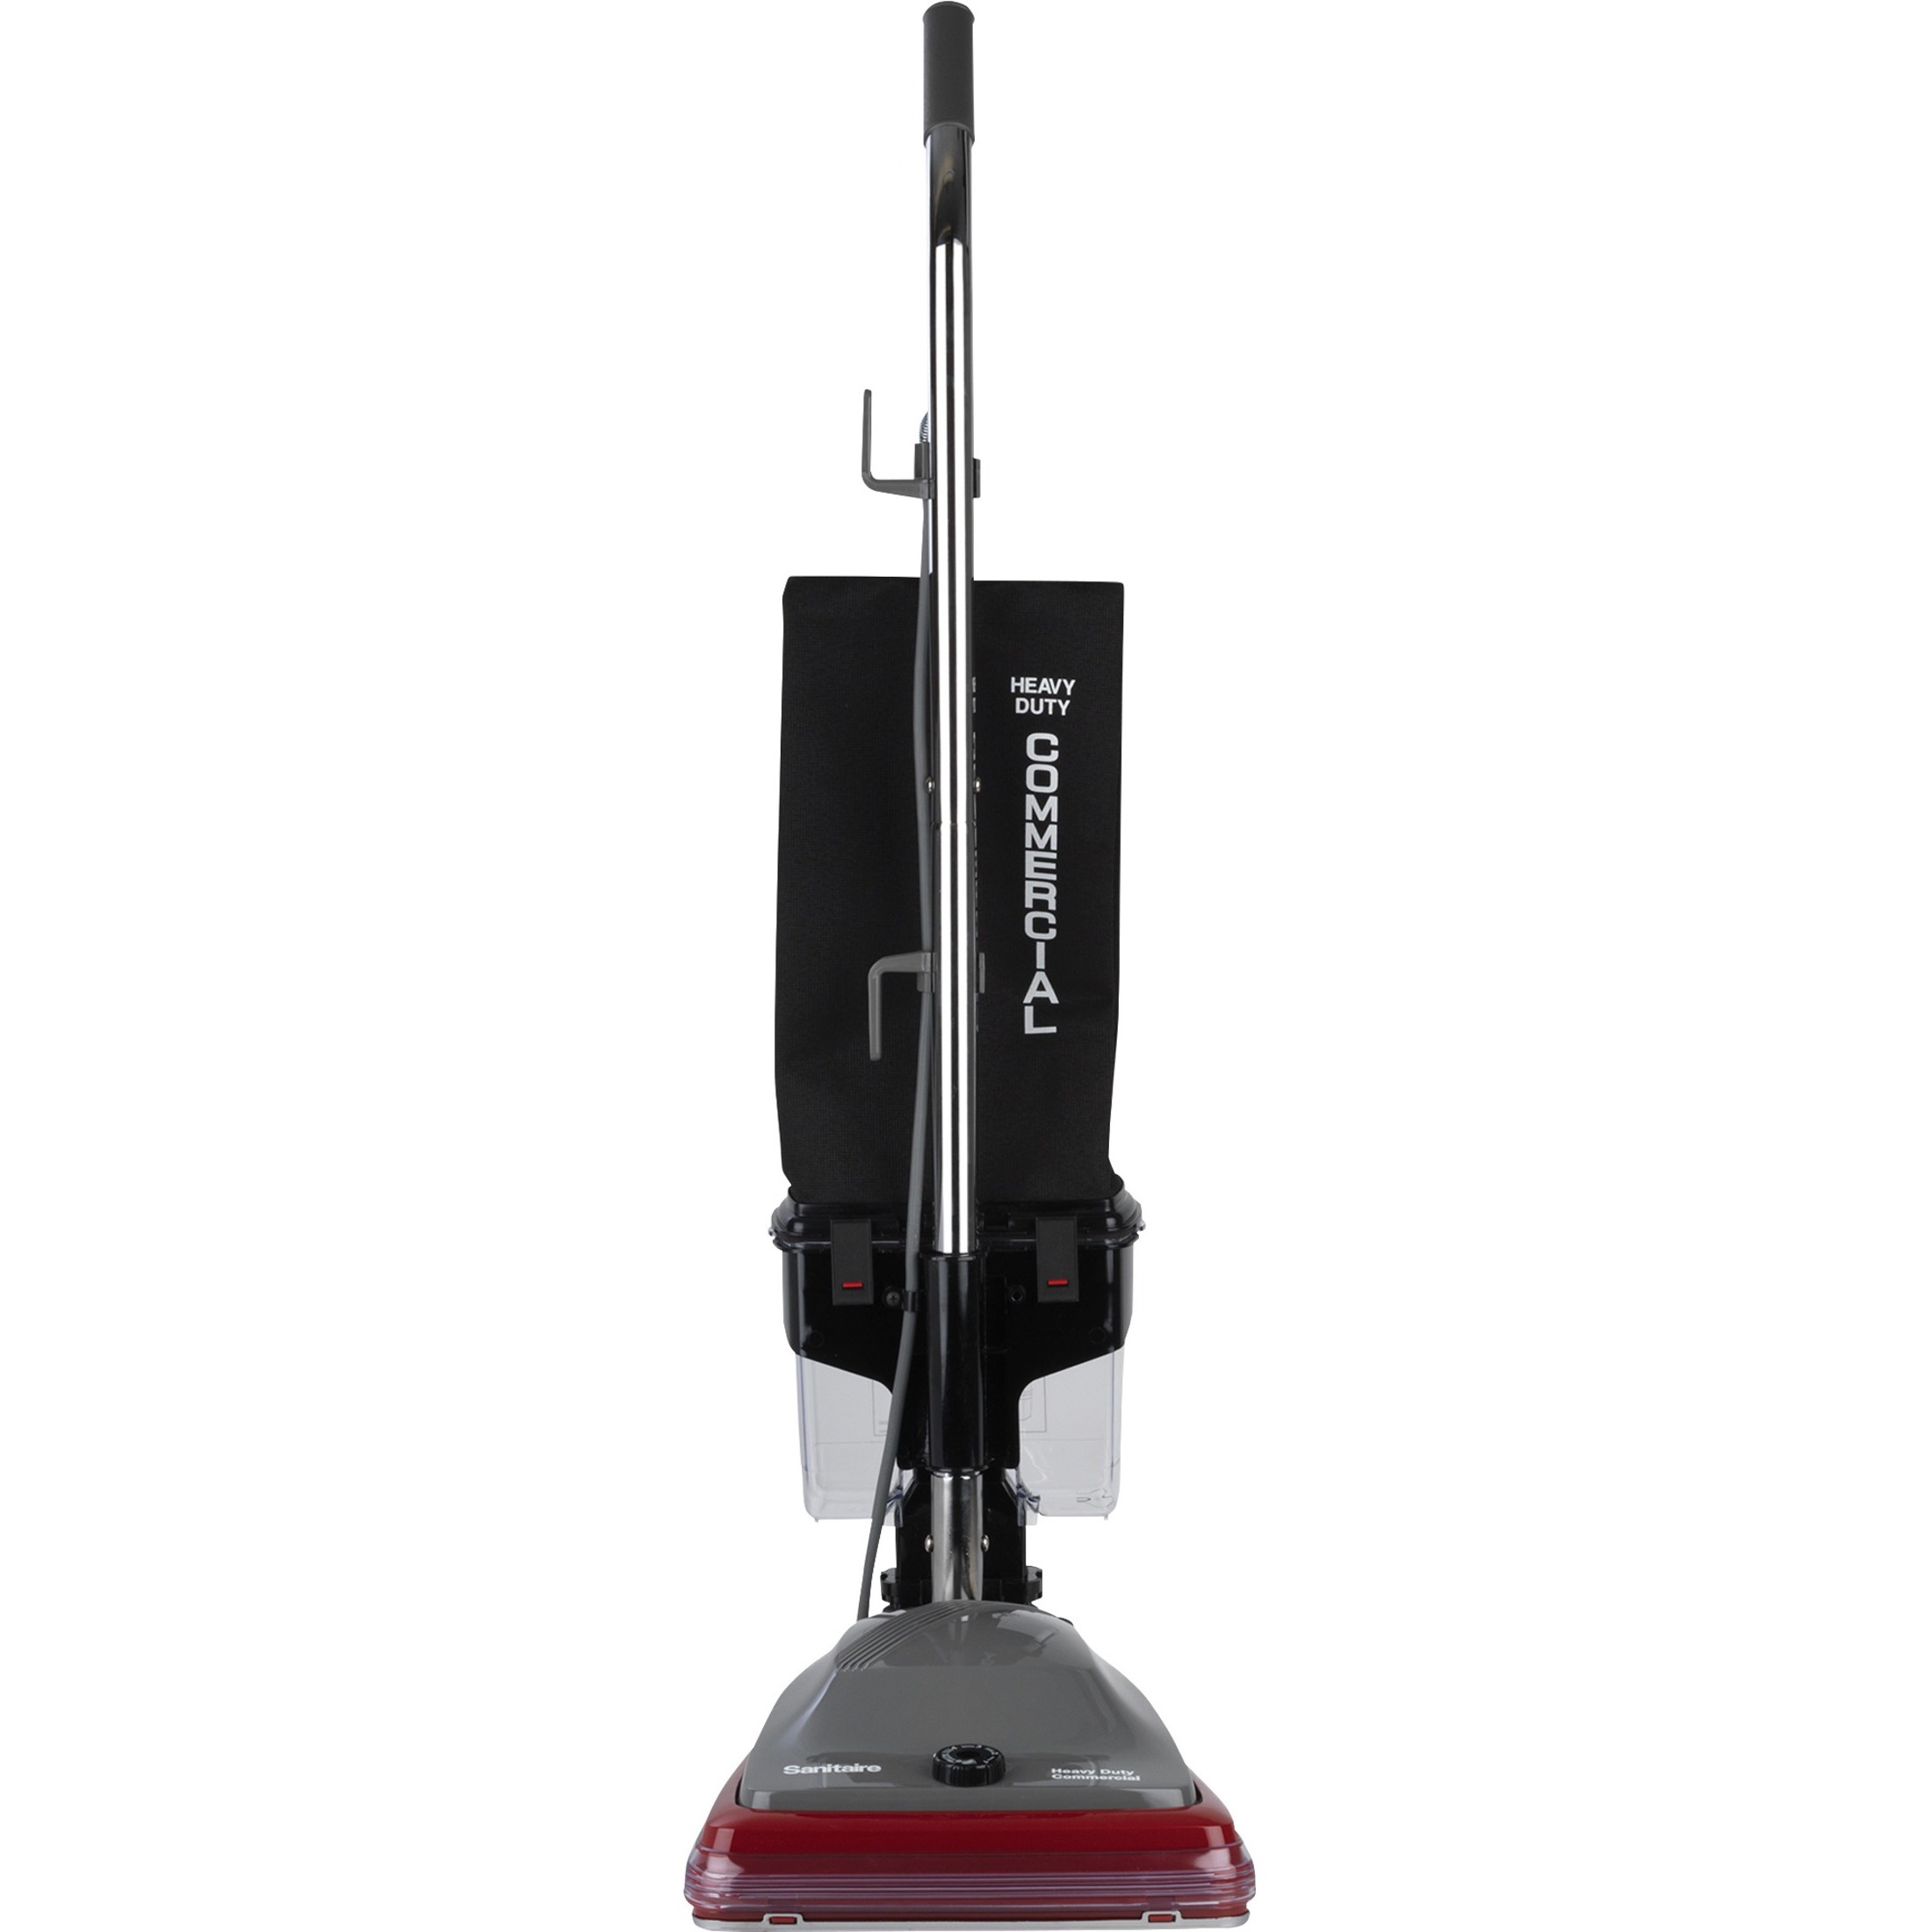 Sanitaire, BISSC689B, SC689 TRADITION Upright Vacuum, Red - image 1 of 3